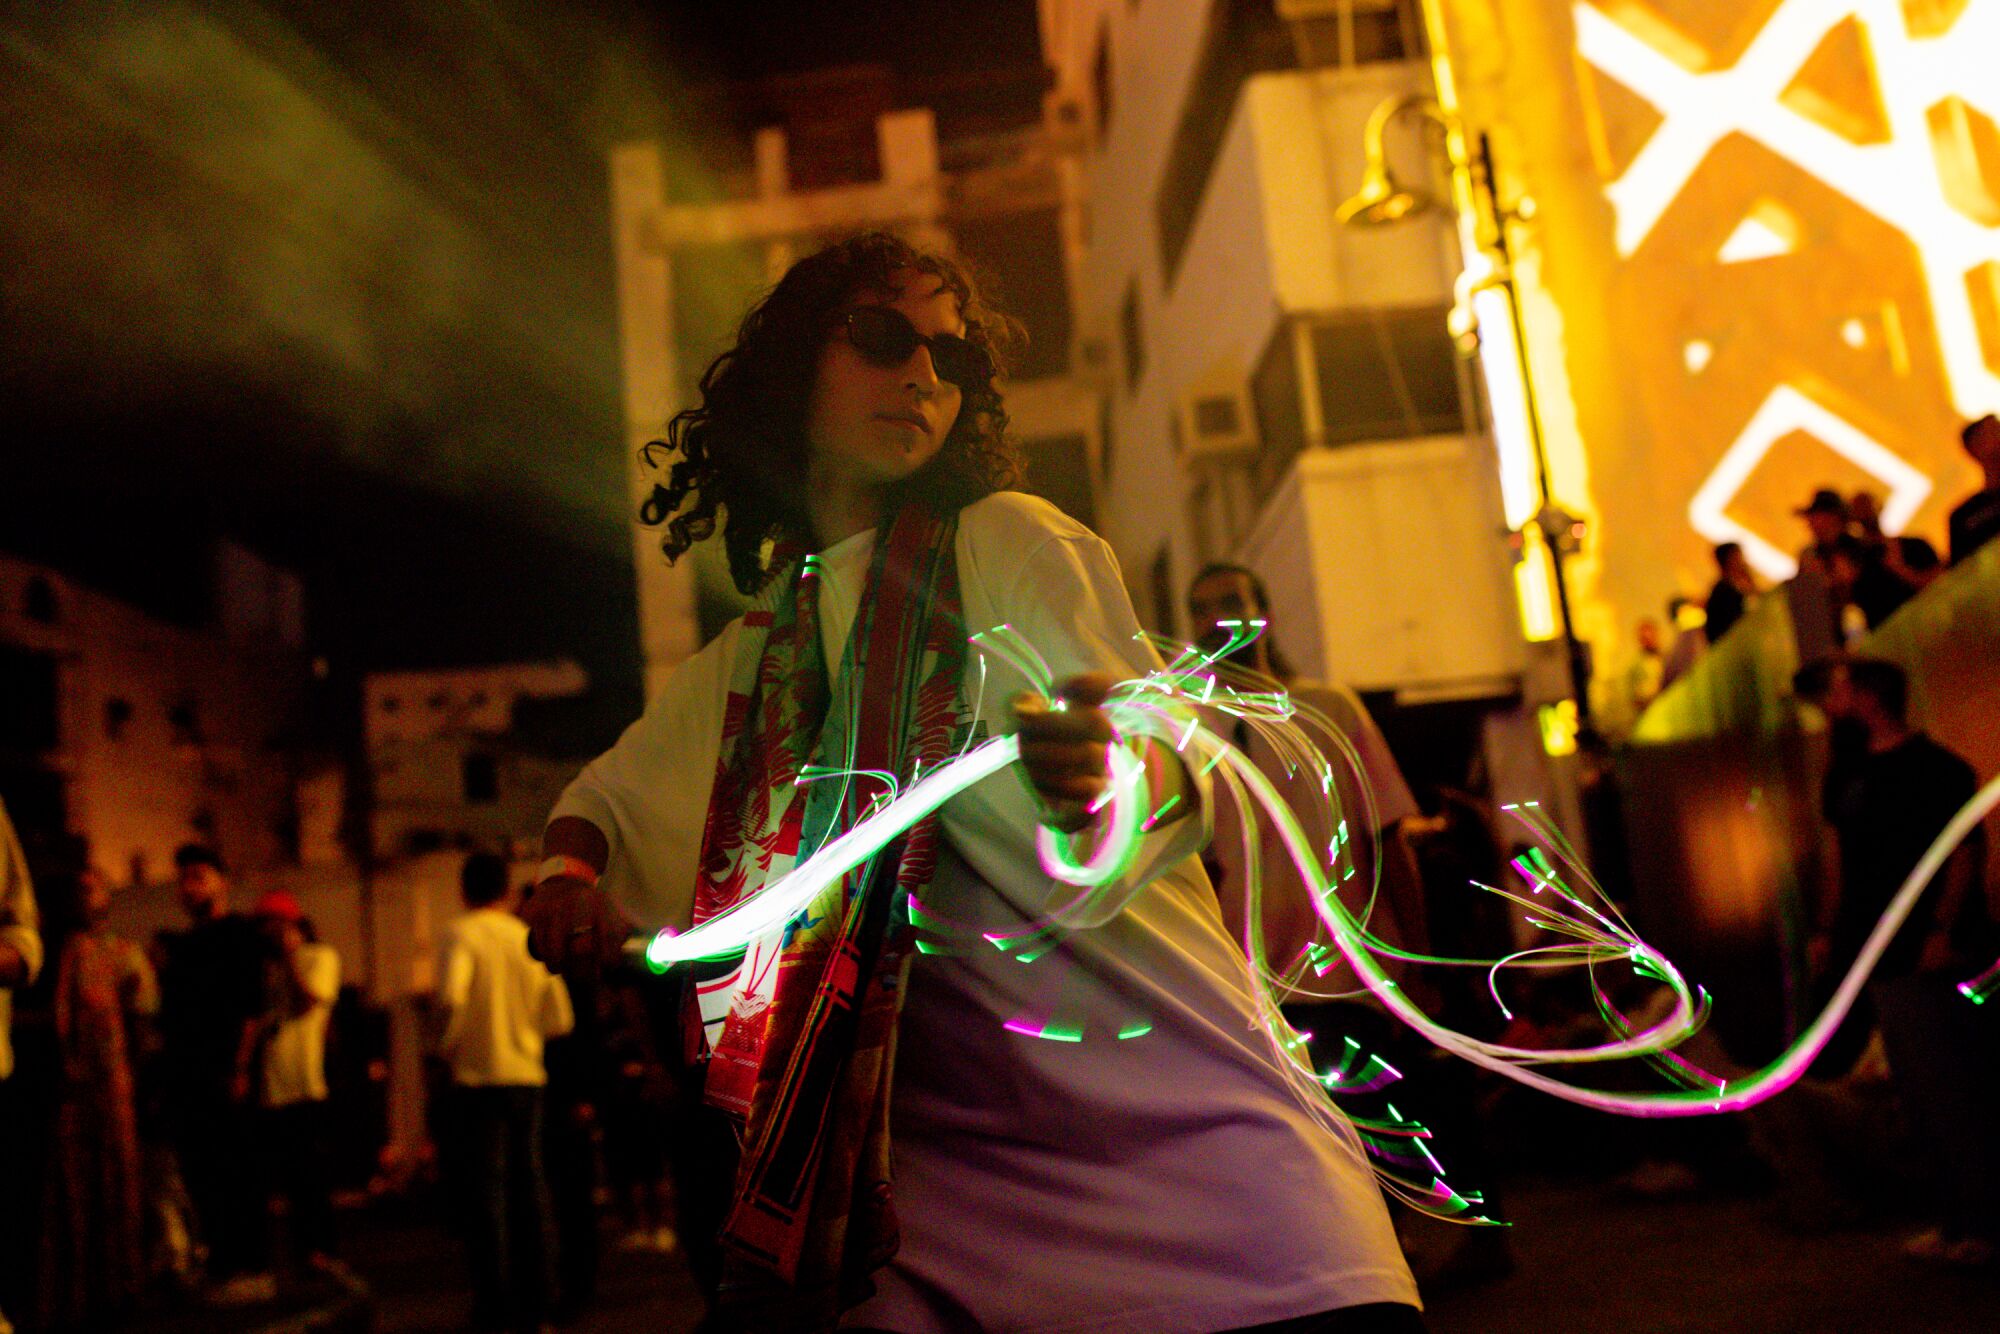 Woman dancing at a rave while holding glowing lights at night.